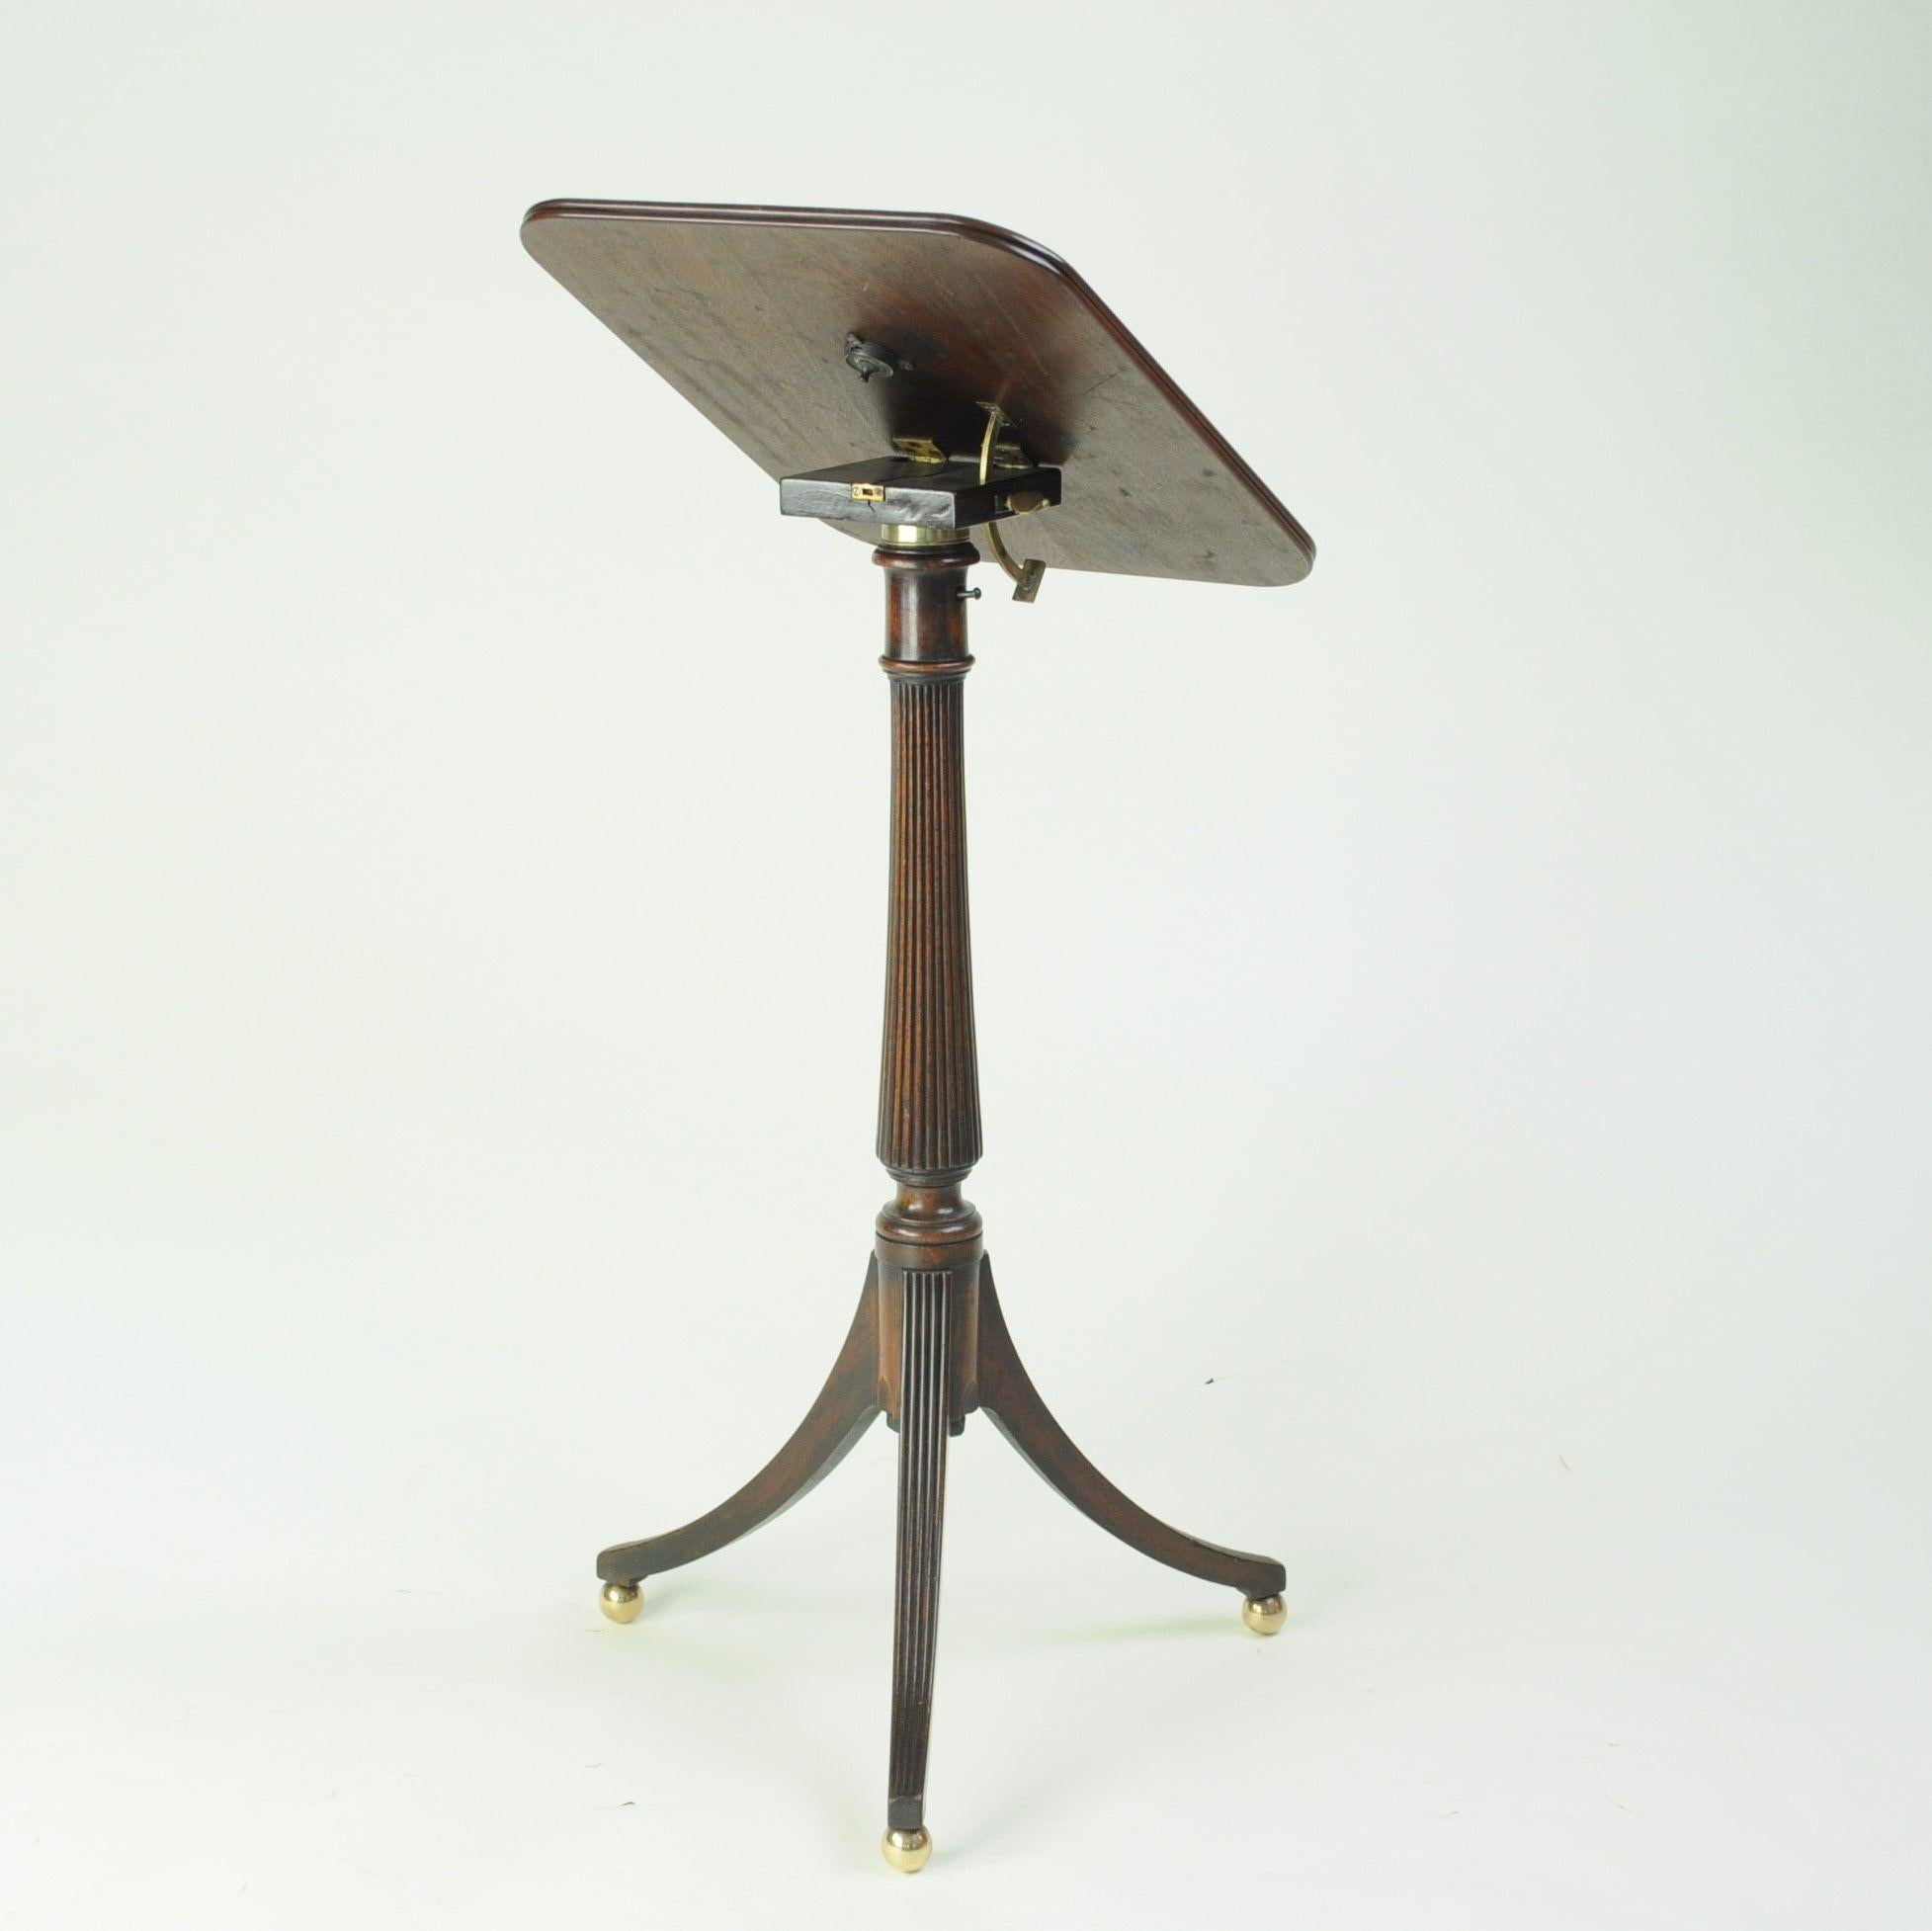 A fine quality Regency period mahogany Lectern or reading table with adjustable tilt top supported on a turned and reeded vase shaped column on a swept tripod base with original brass ball feet.
When not being used as a lectern the top folds flat